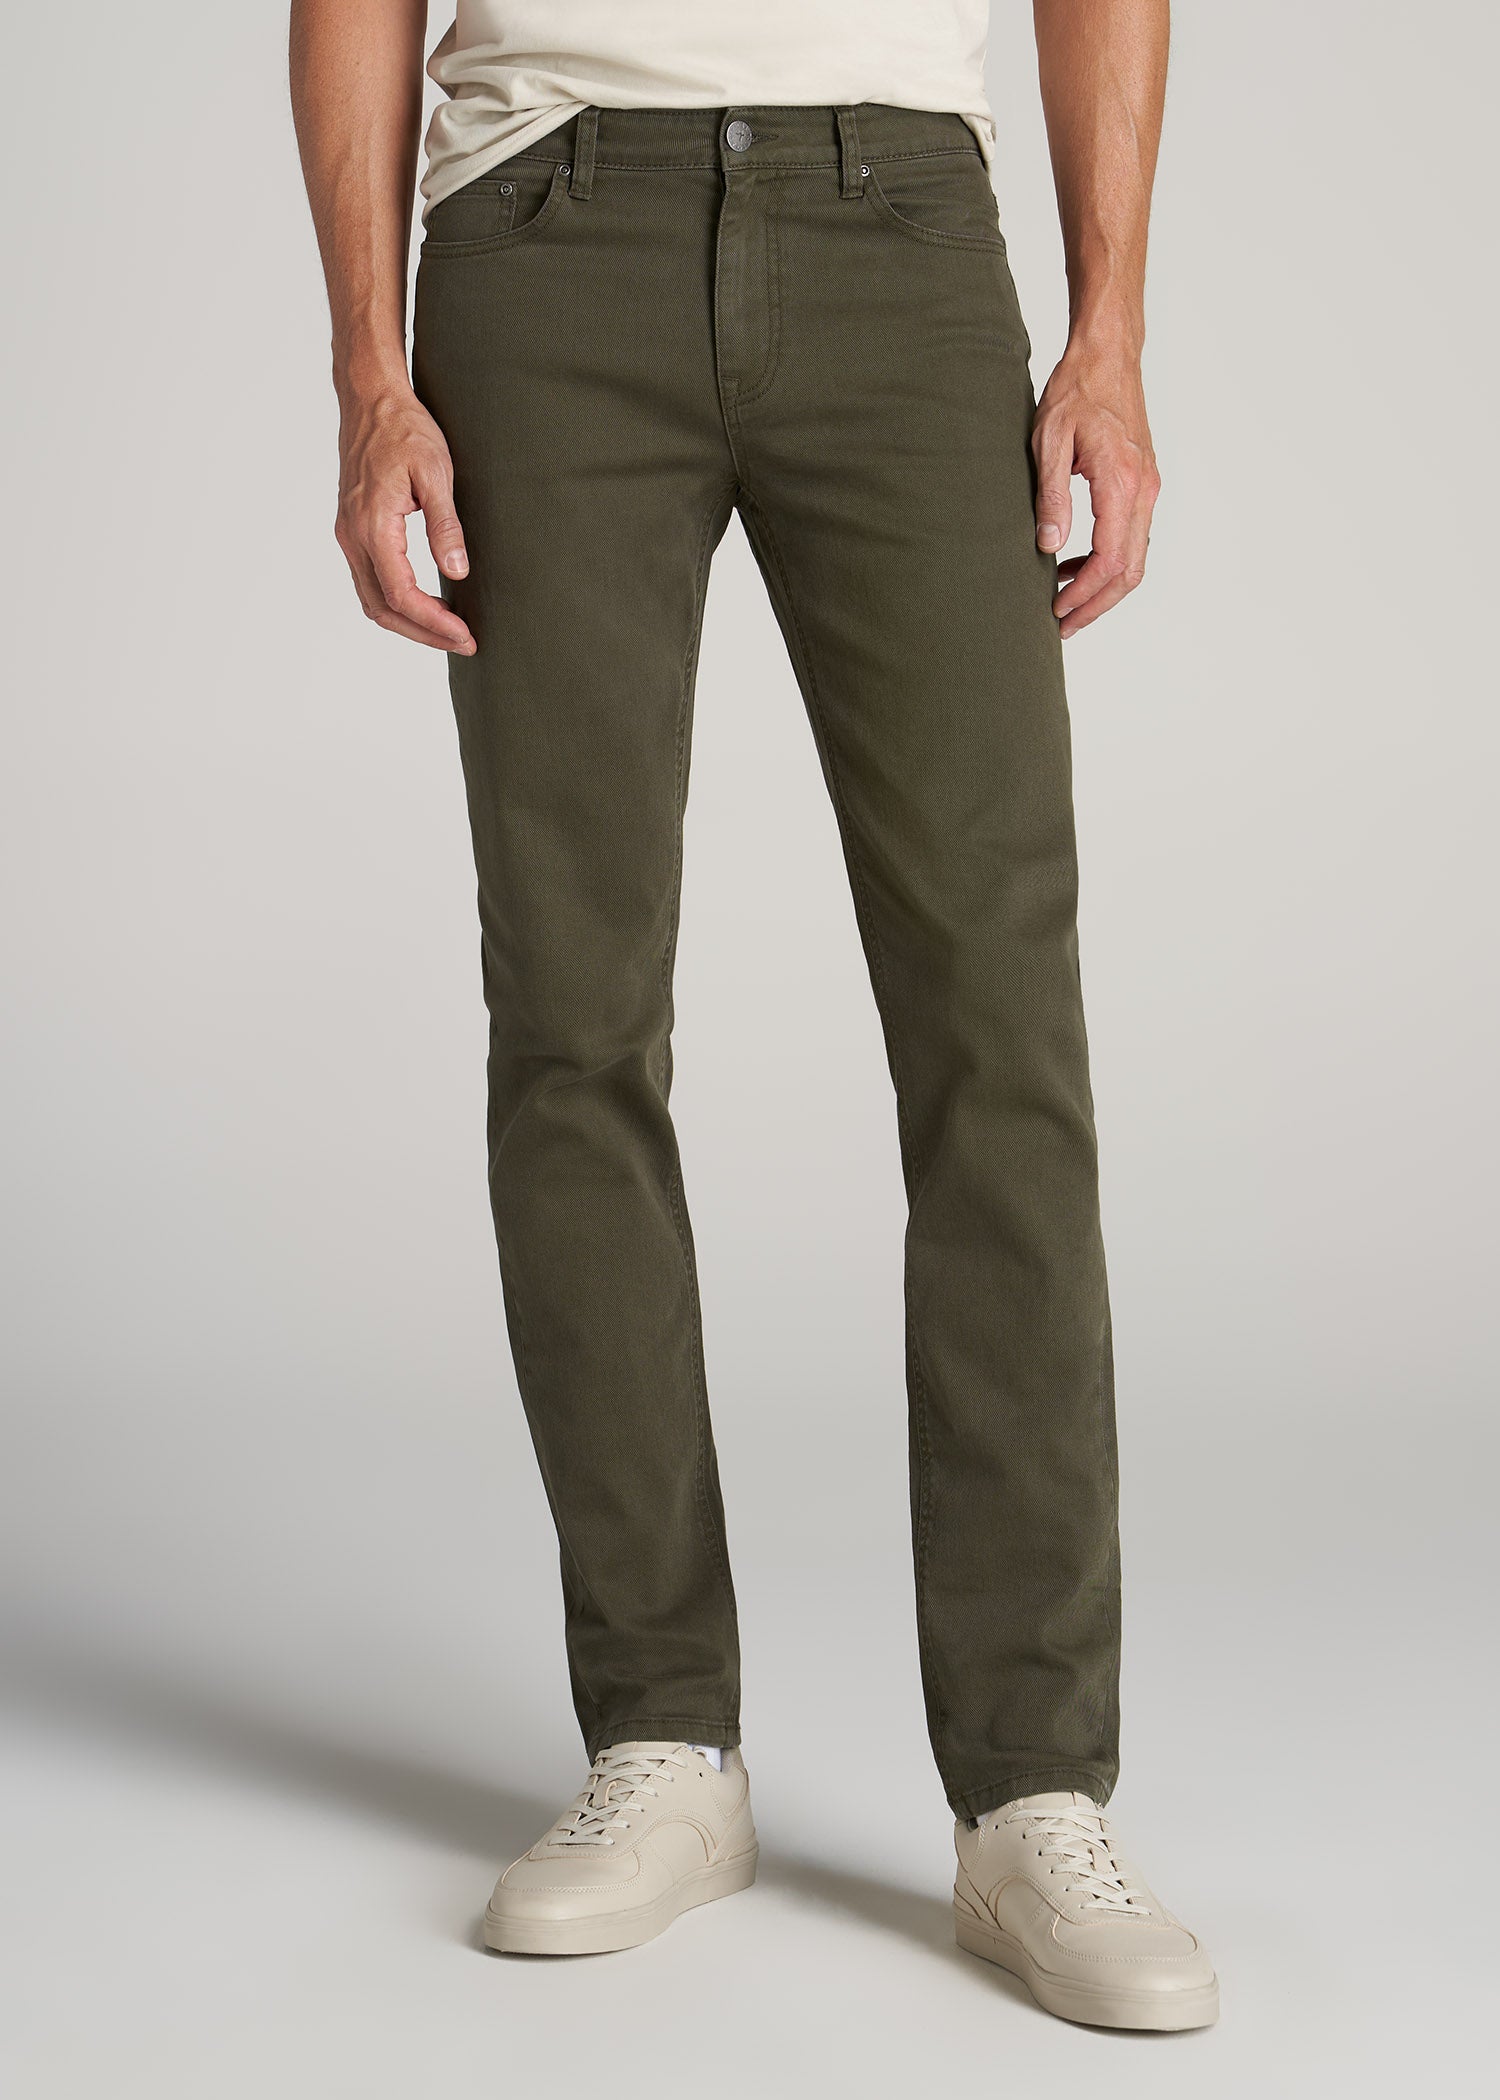    American-Tall-Men-Mens-Dylan-Slim-Fit-Jeans-Olive-Green-Wash-front